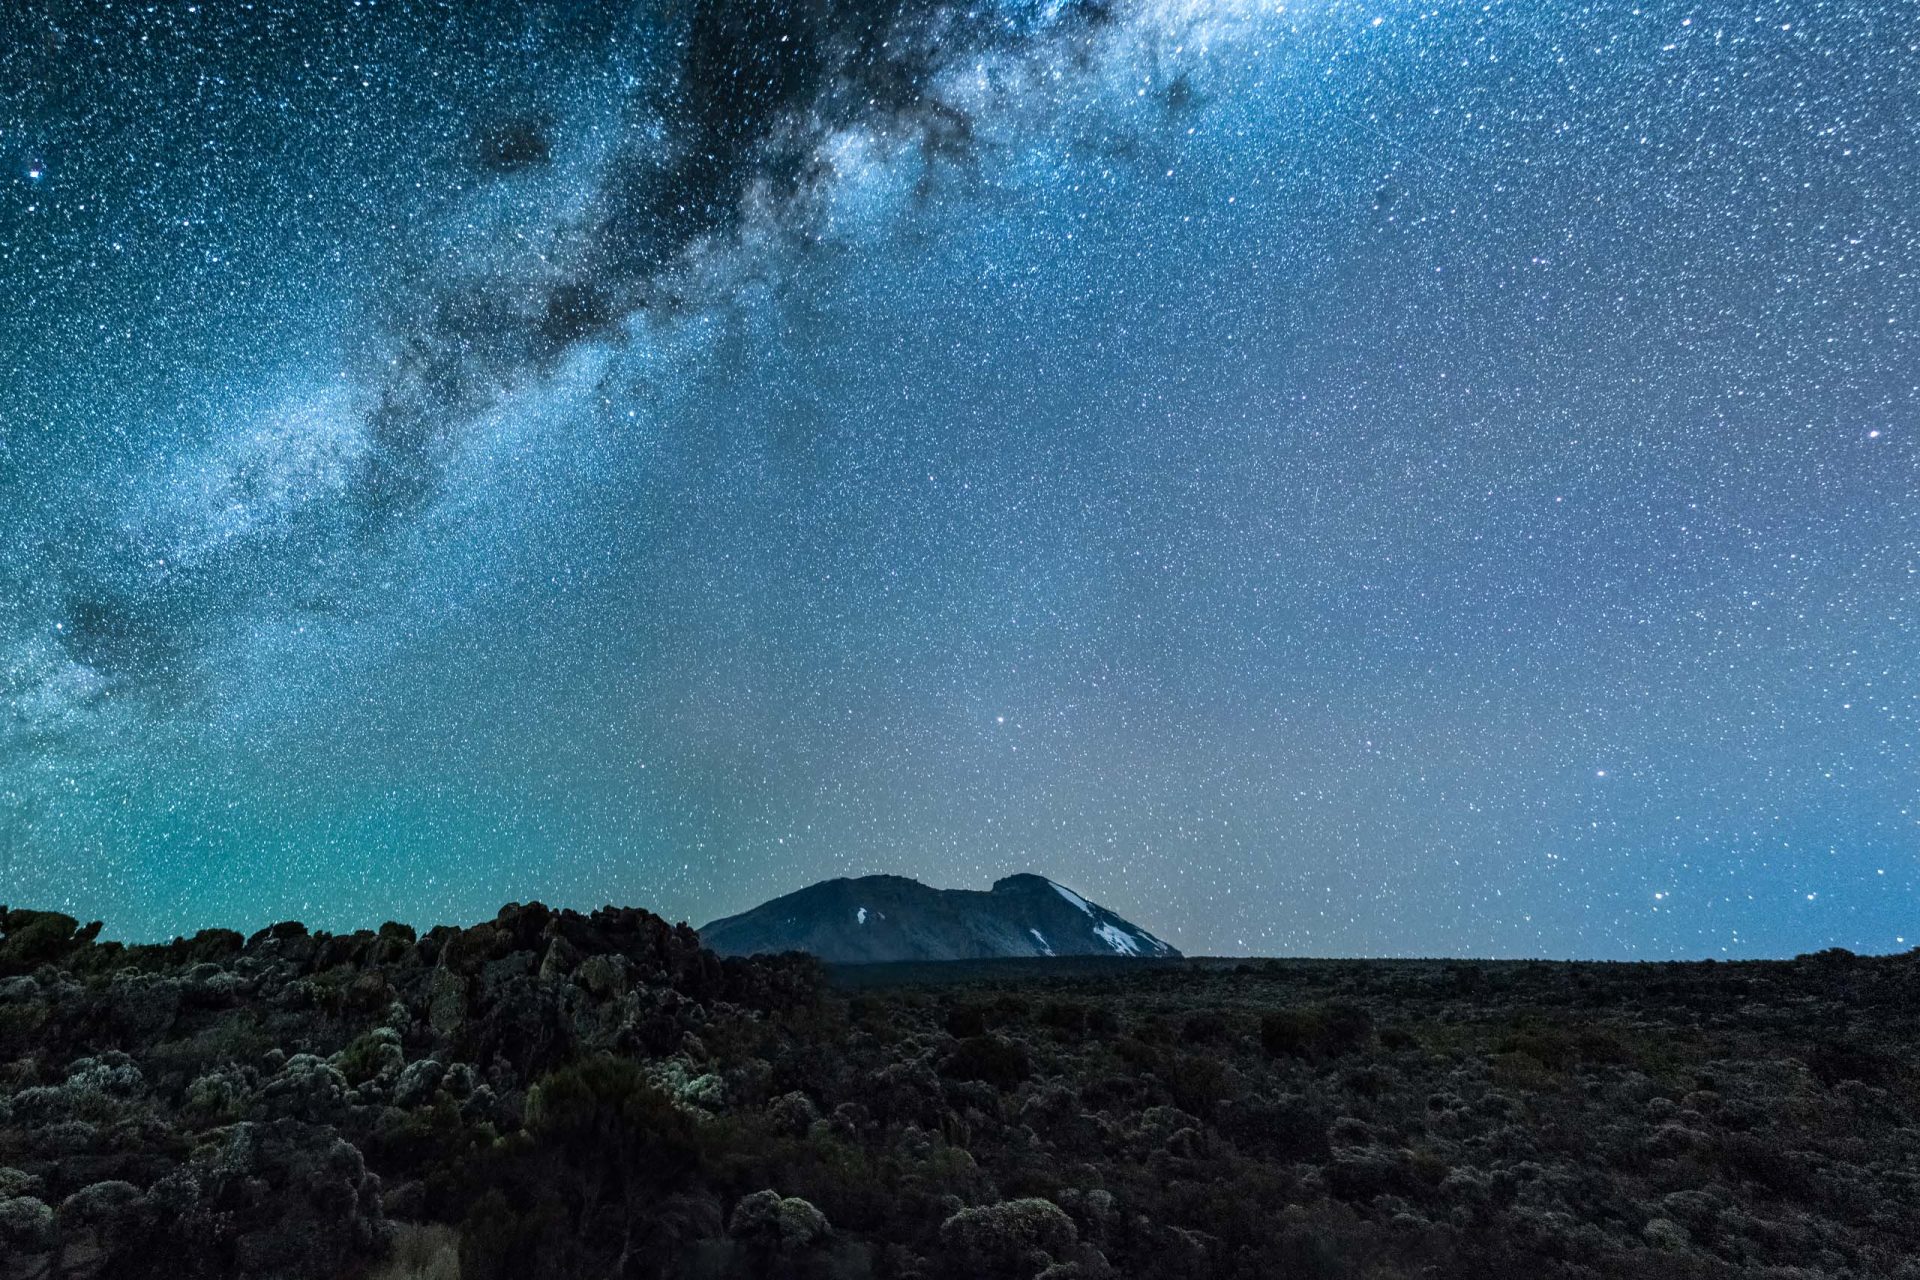 Mount Kilimanjaro under the Milky Way skies. At 4000 Mts above sea level you can experience the most amazing peaceful skies while hiking to Kilimanjaro.